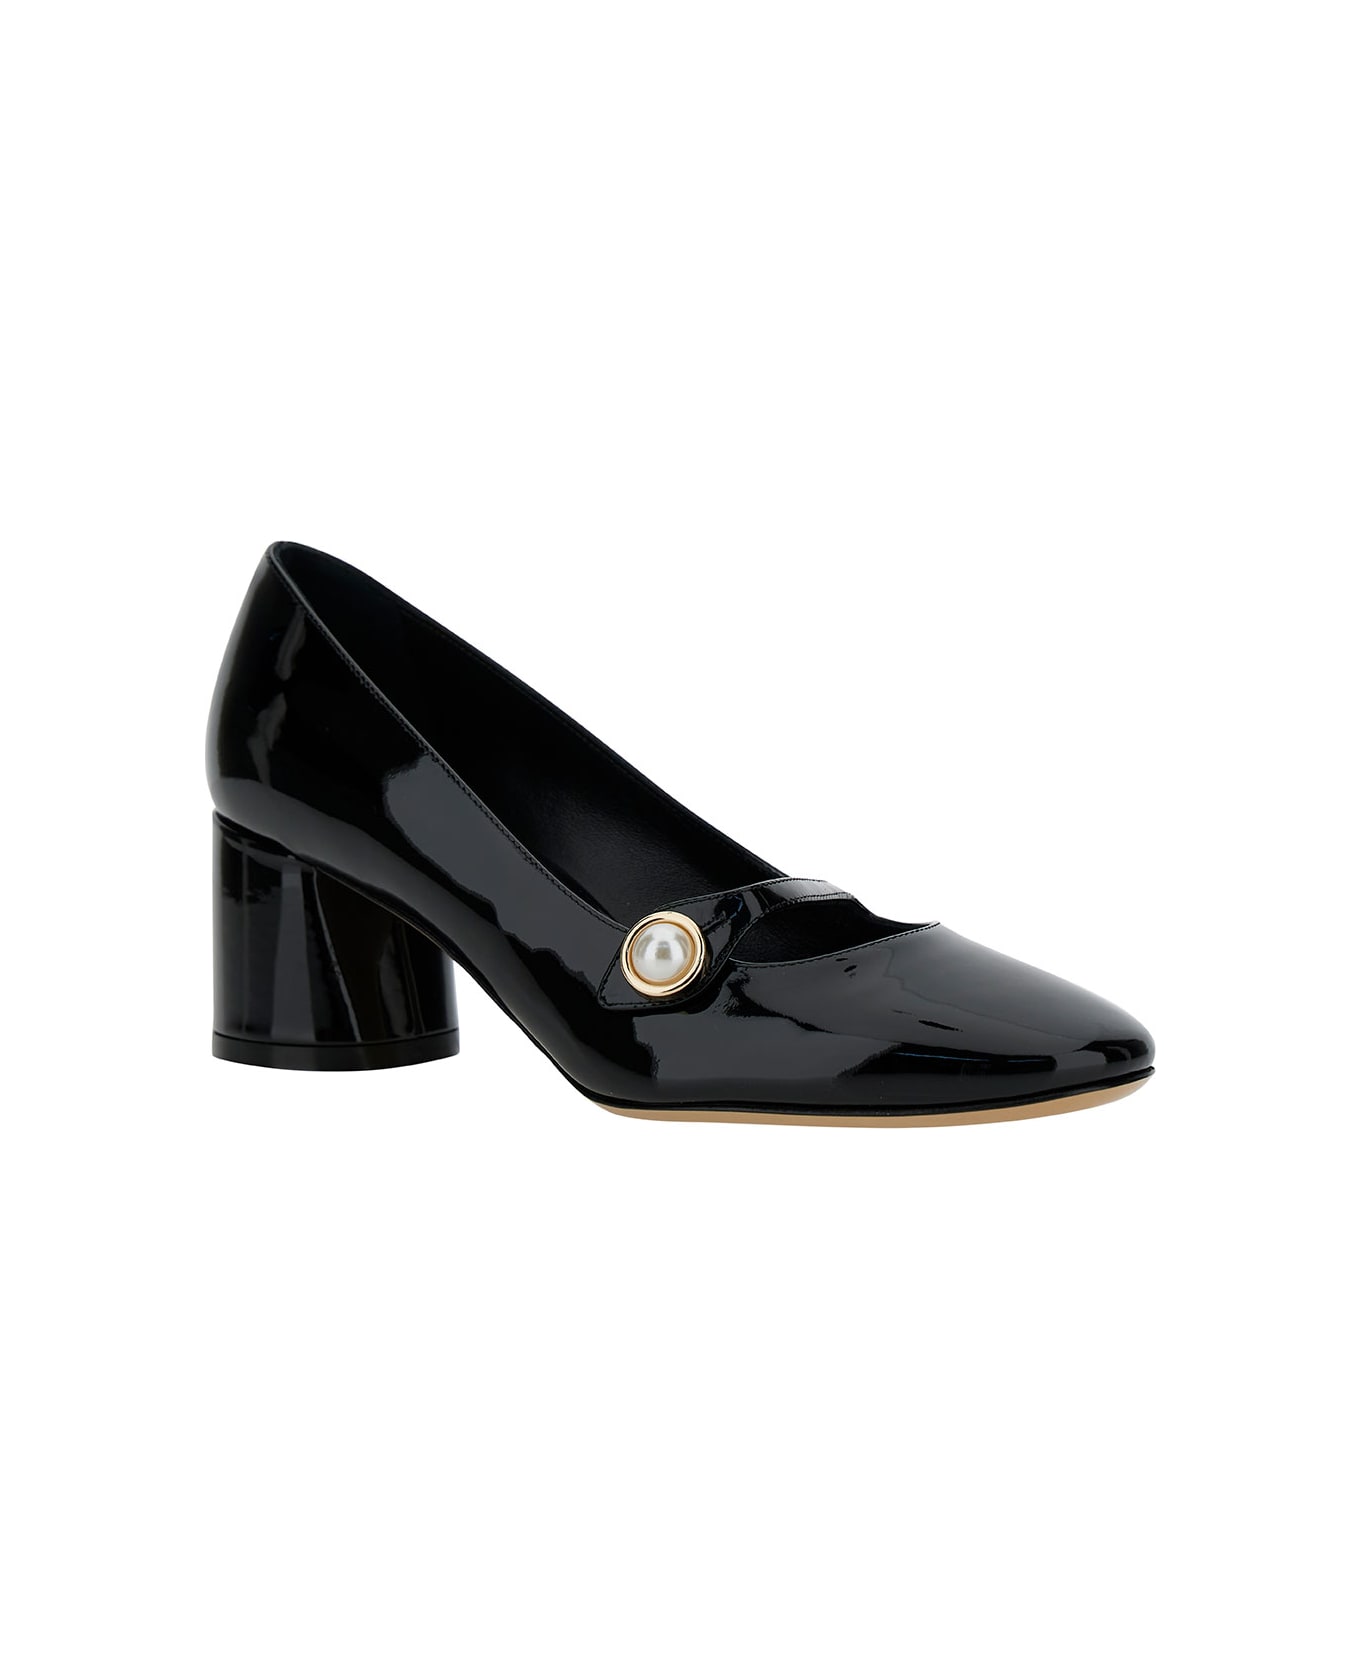 Casadei 'emily' Black Pointed Pumps With Pearl Detail In Patent Leather Woman - Black ハイヒール